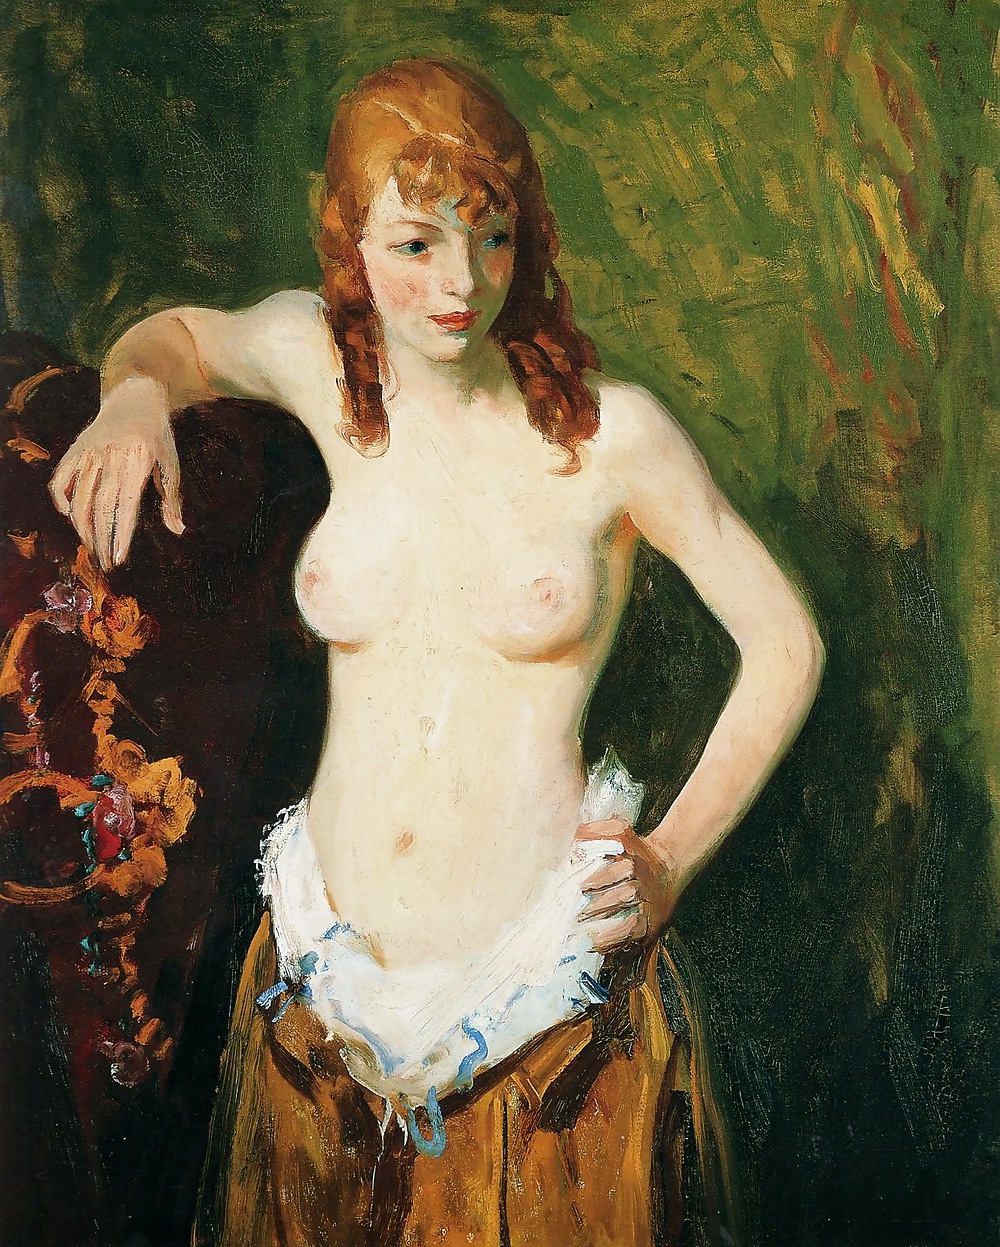 Painted Ero and Porn Art 41 - Robert Henri for Buggster #11067733